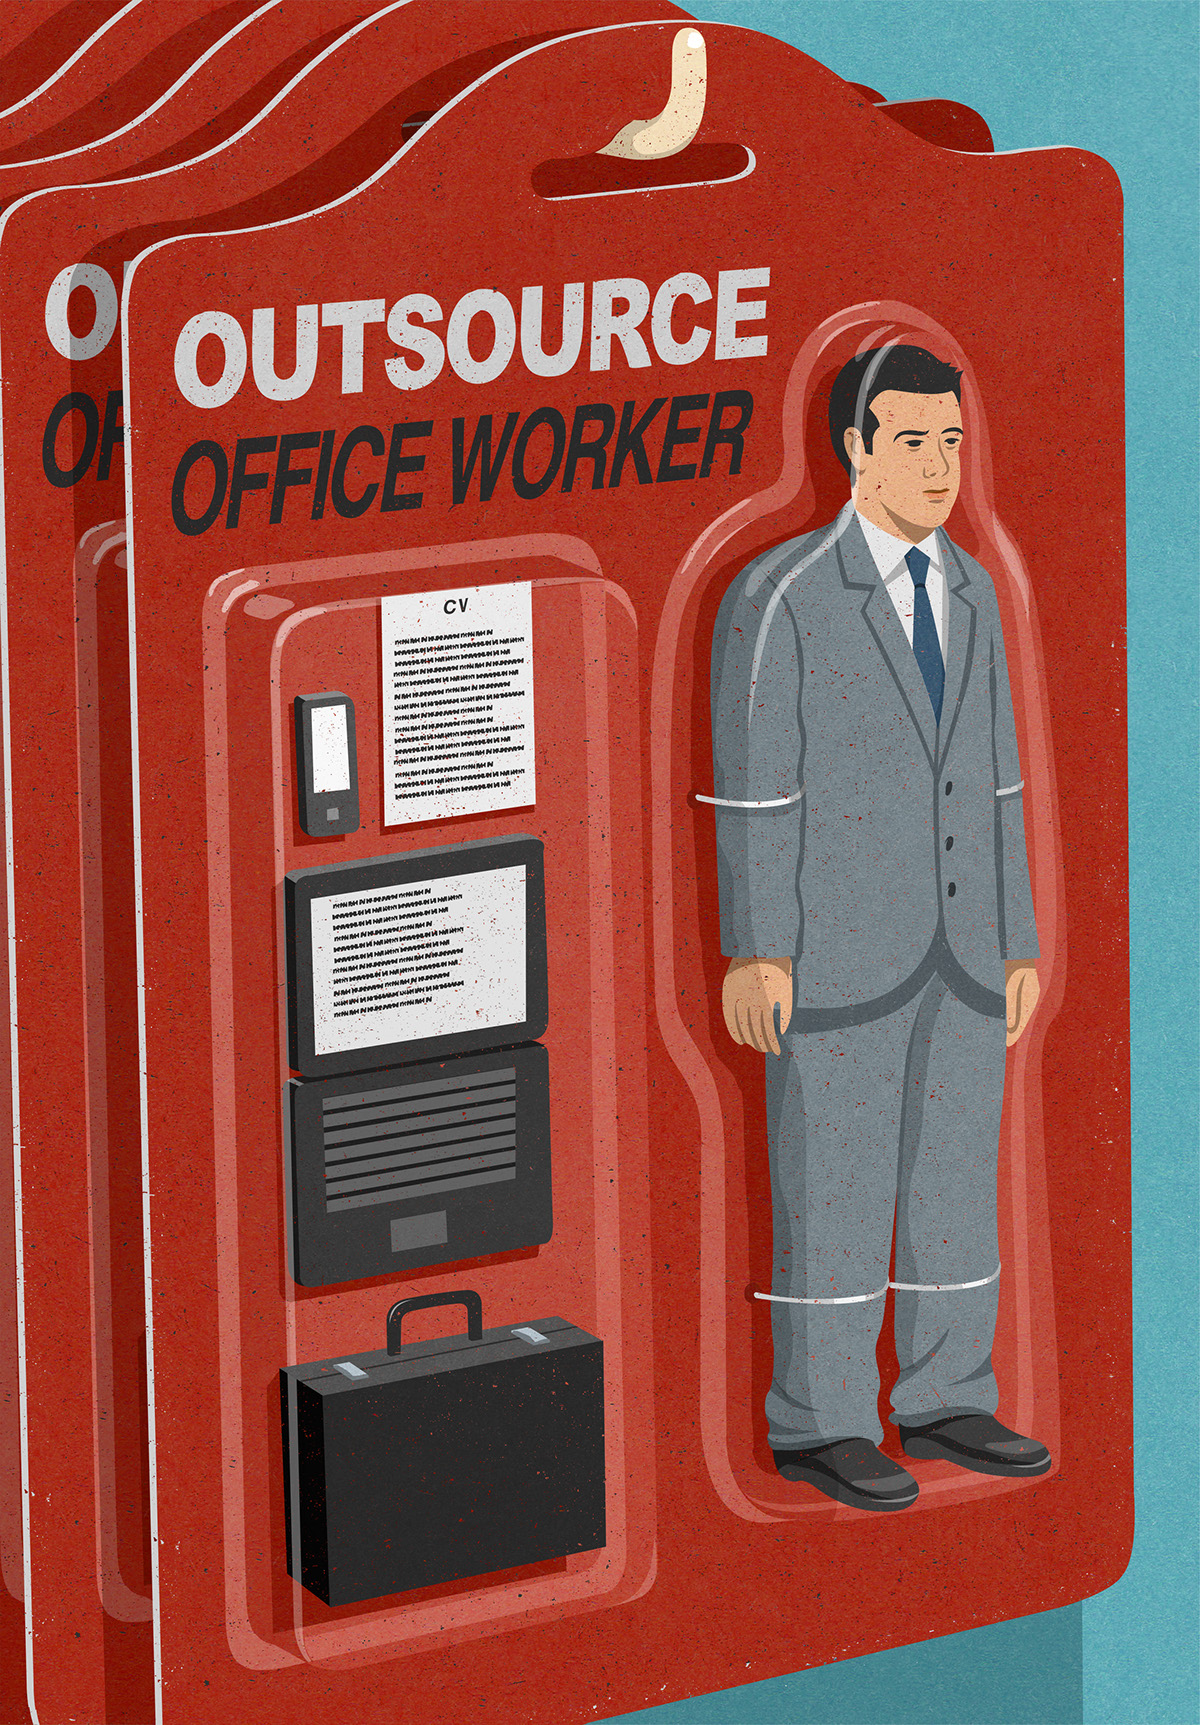 doctor business employees quirky editorial magazines screen print humour satire Editorial Illustration